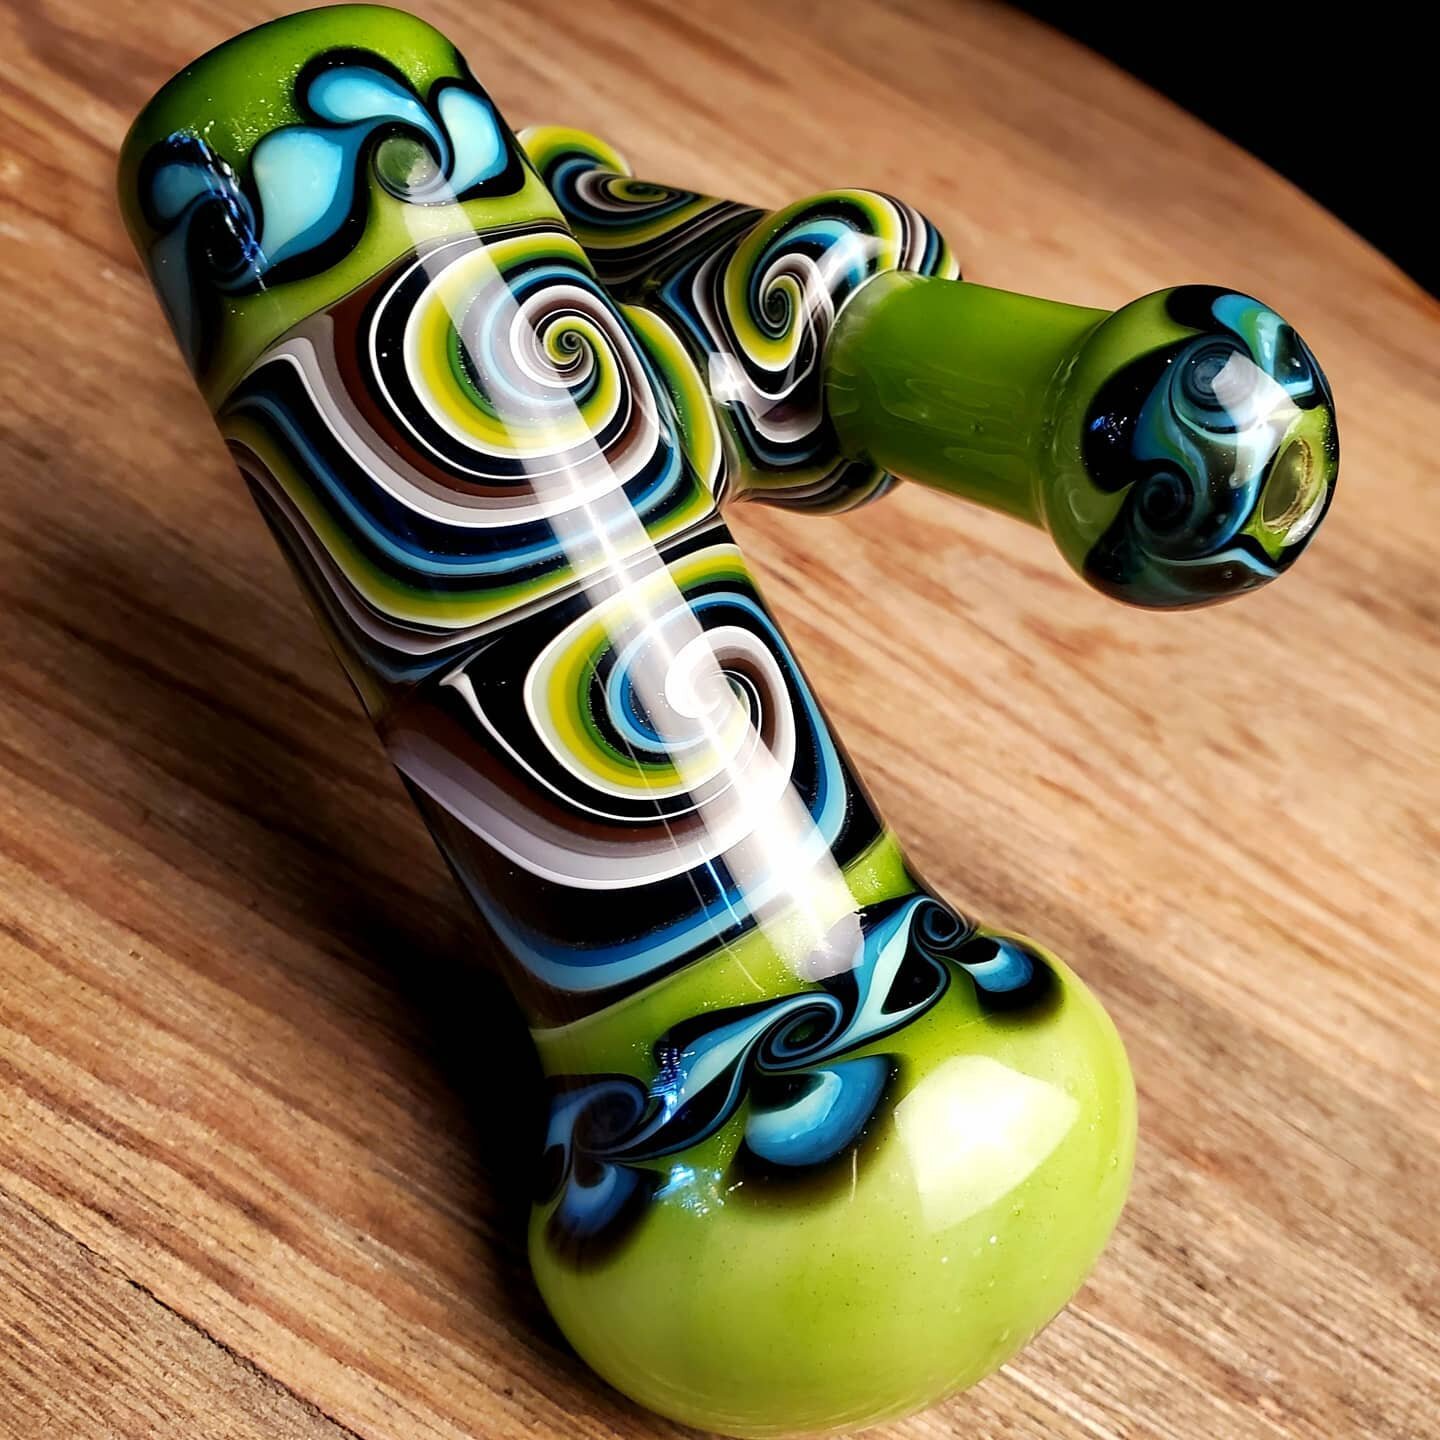 Sometimes  ya just gotta put the lime in the coconut. Chillaxicate your senses with the smooth curves and cool style of the lime sublime chopper bub.
WHAT MAKES YOUR SOULSHINE?
#soulshineartsstudio #humboldtglassschool #Humboldt #glassblowing #glassp